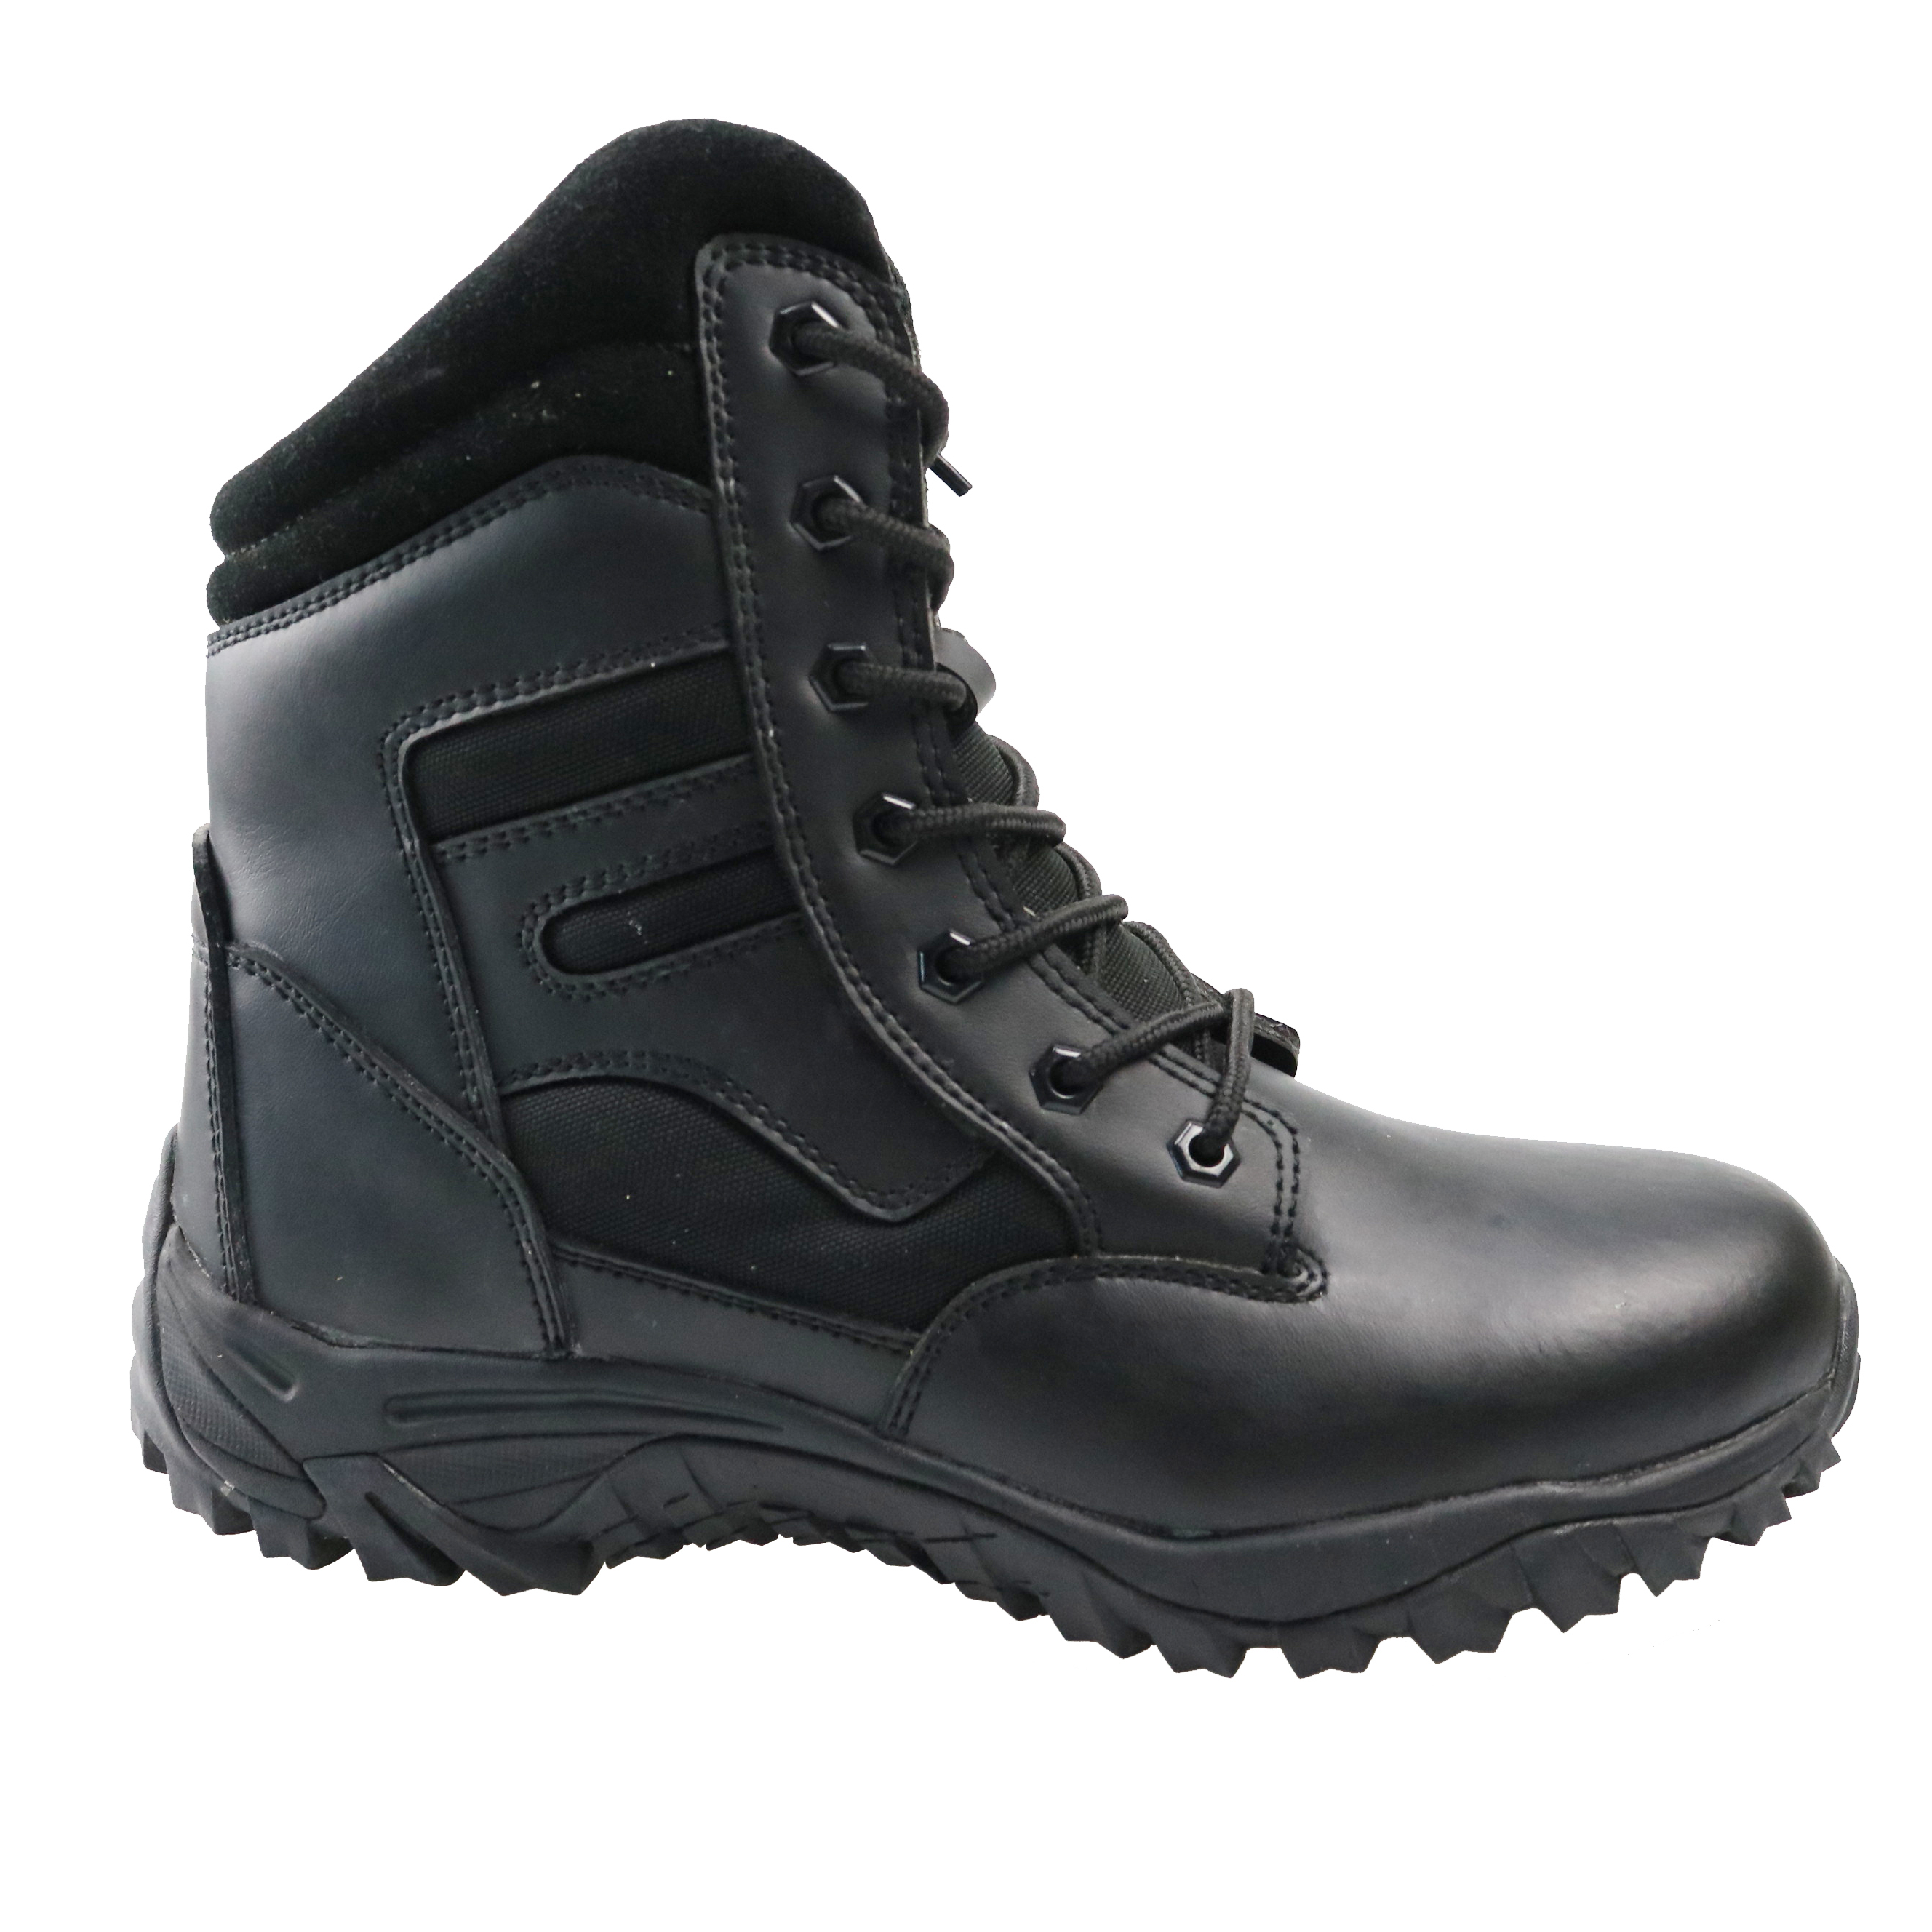 Anti-slip steel toe safety boots safety shoes for work for men